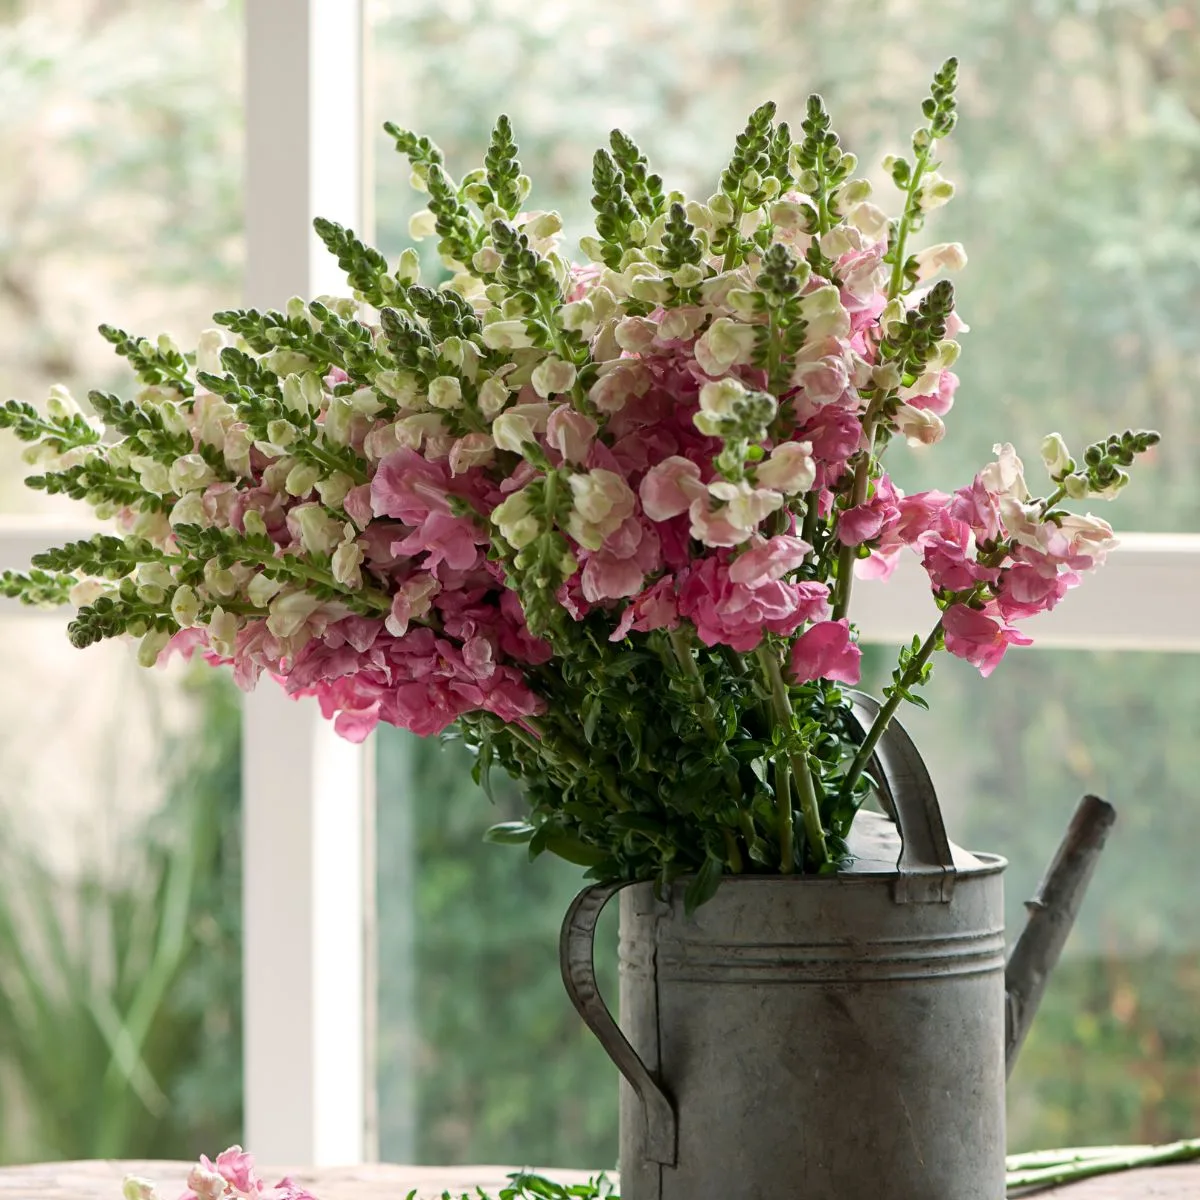 A beautiful bouquet of pink and white snapdragons in a metal pail.